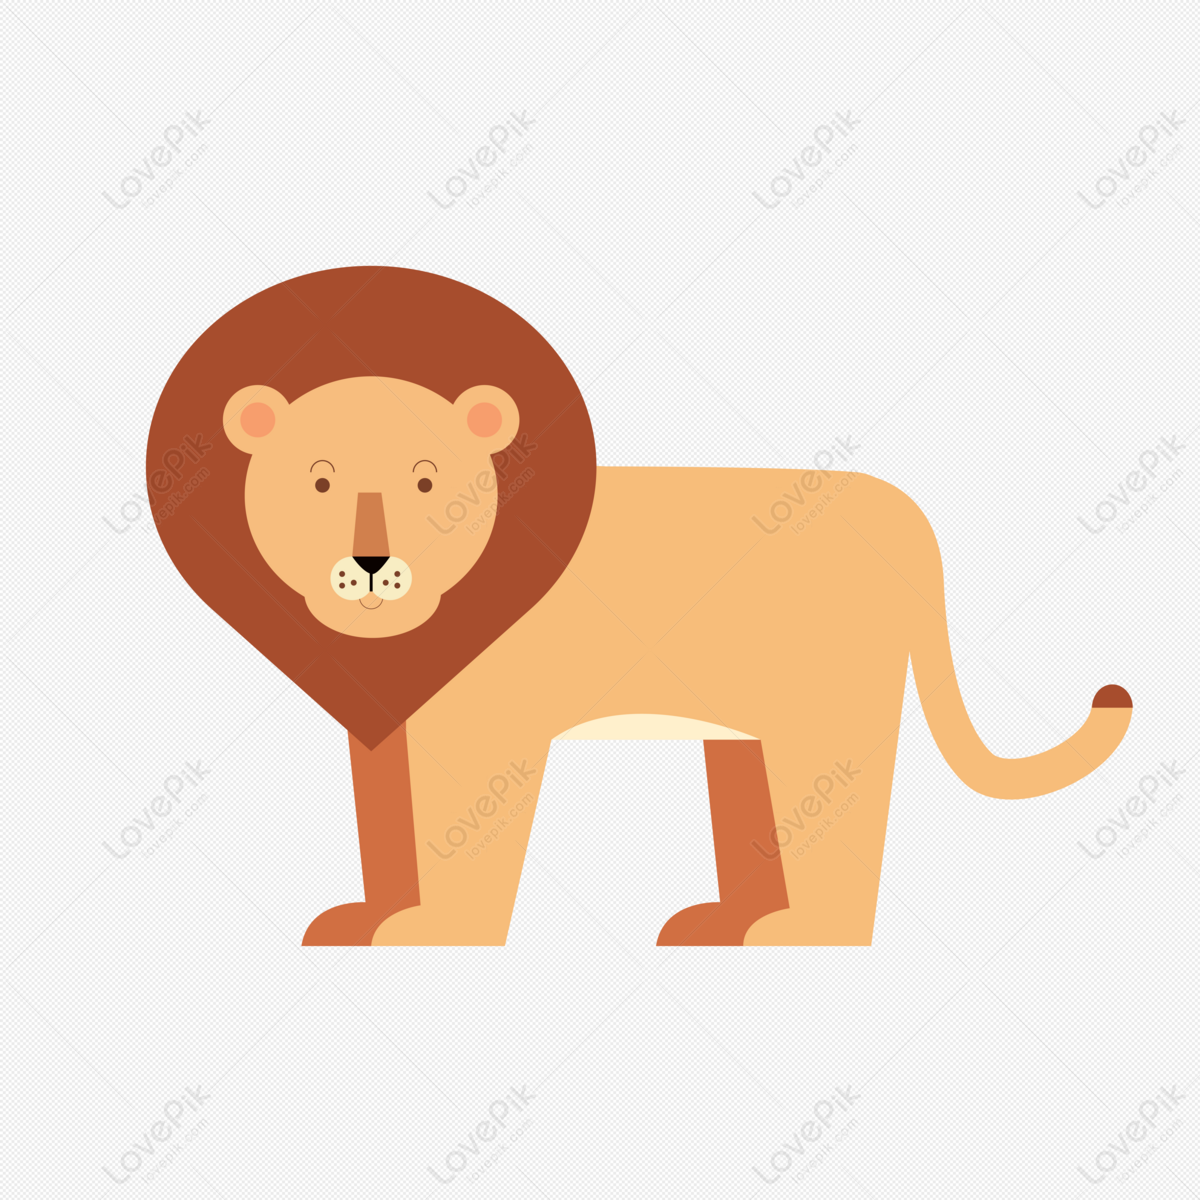 Little Lion Animal Cartoon Vector Cute Elements Free PNG And Clipart Image  For Free Download - Lovepik | 401180189